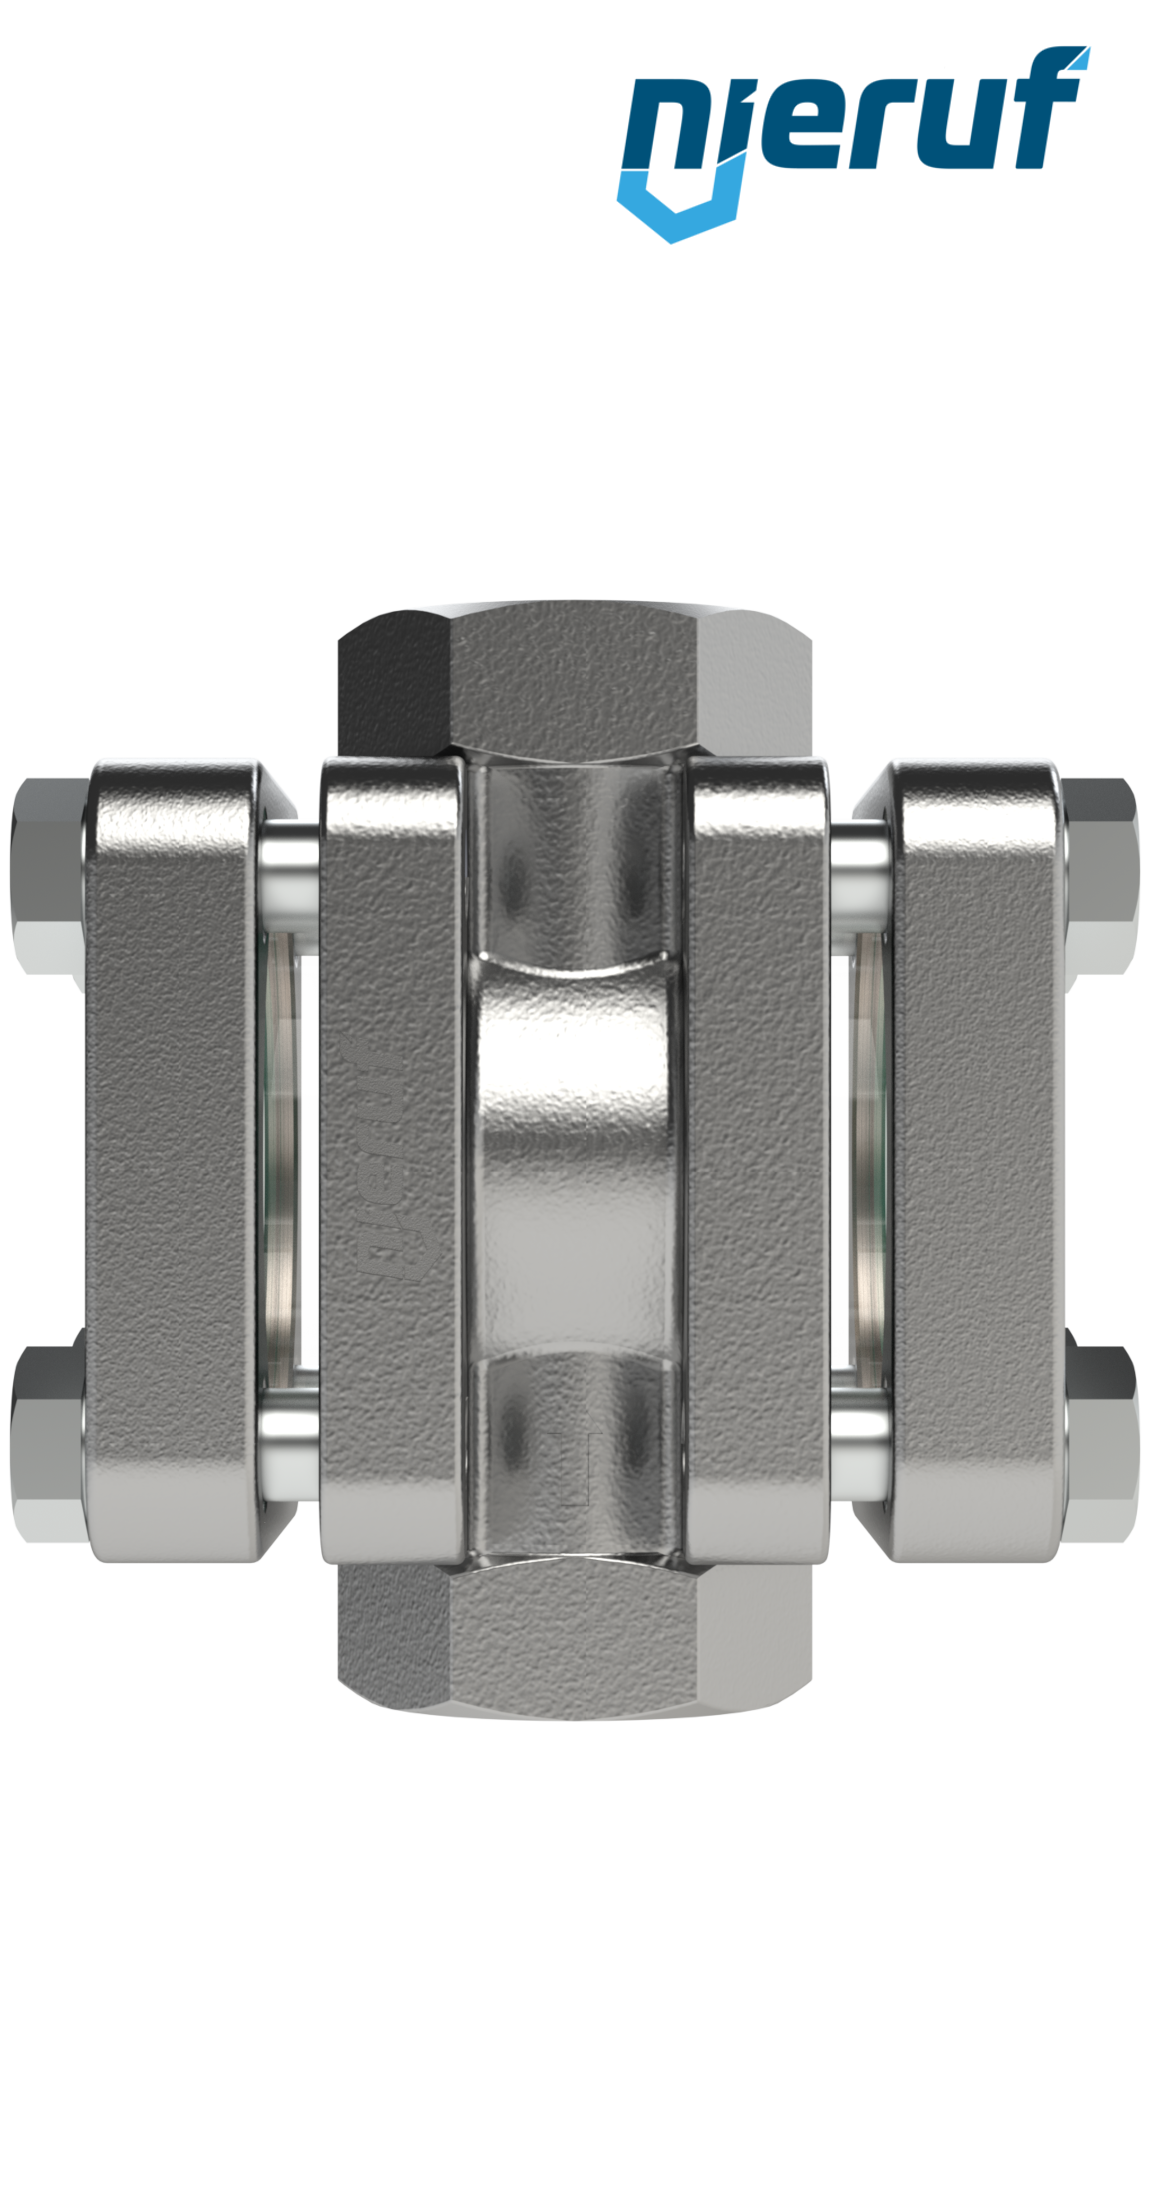 flow-through sight flow indicator DN32 - 1 1/4" inch stainless steel soda lime glass design with disc